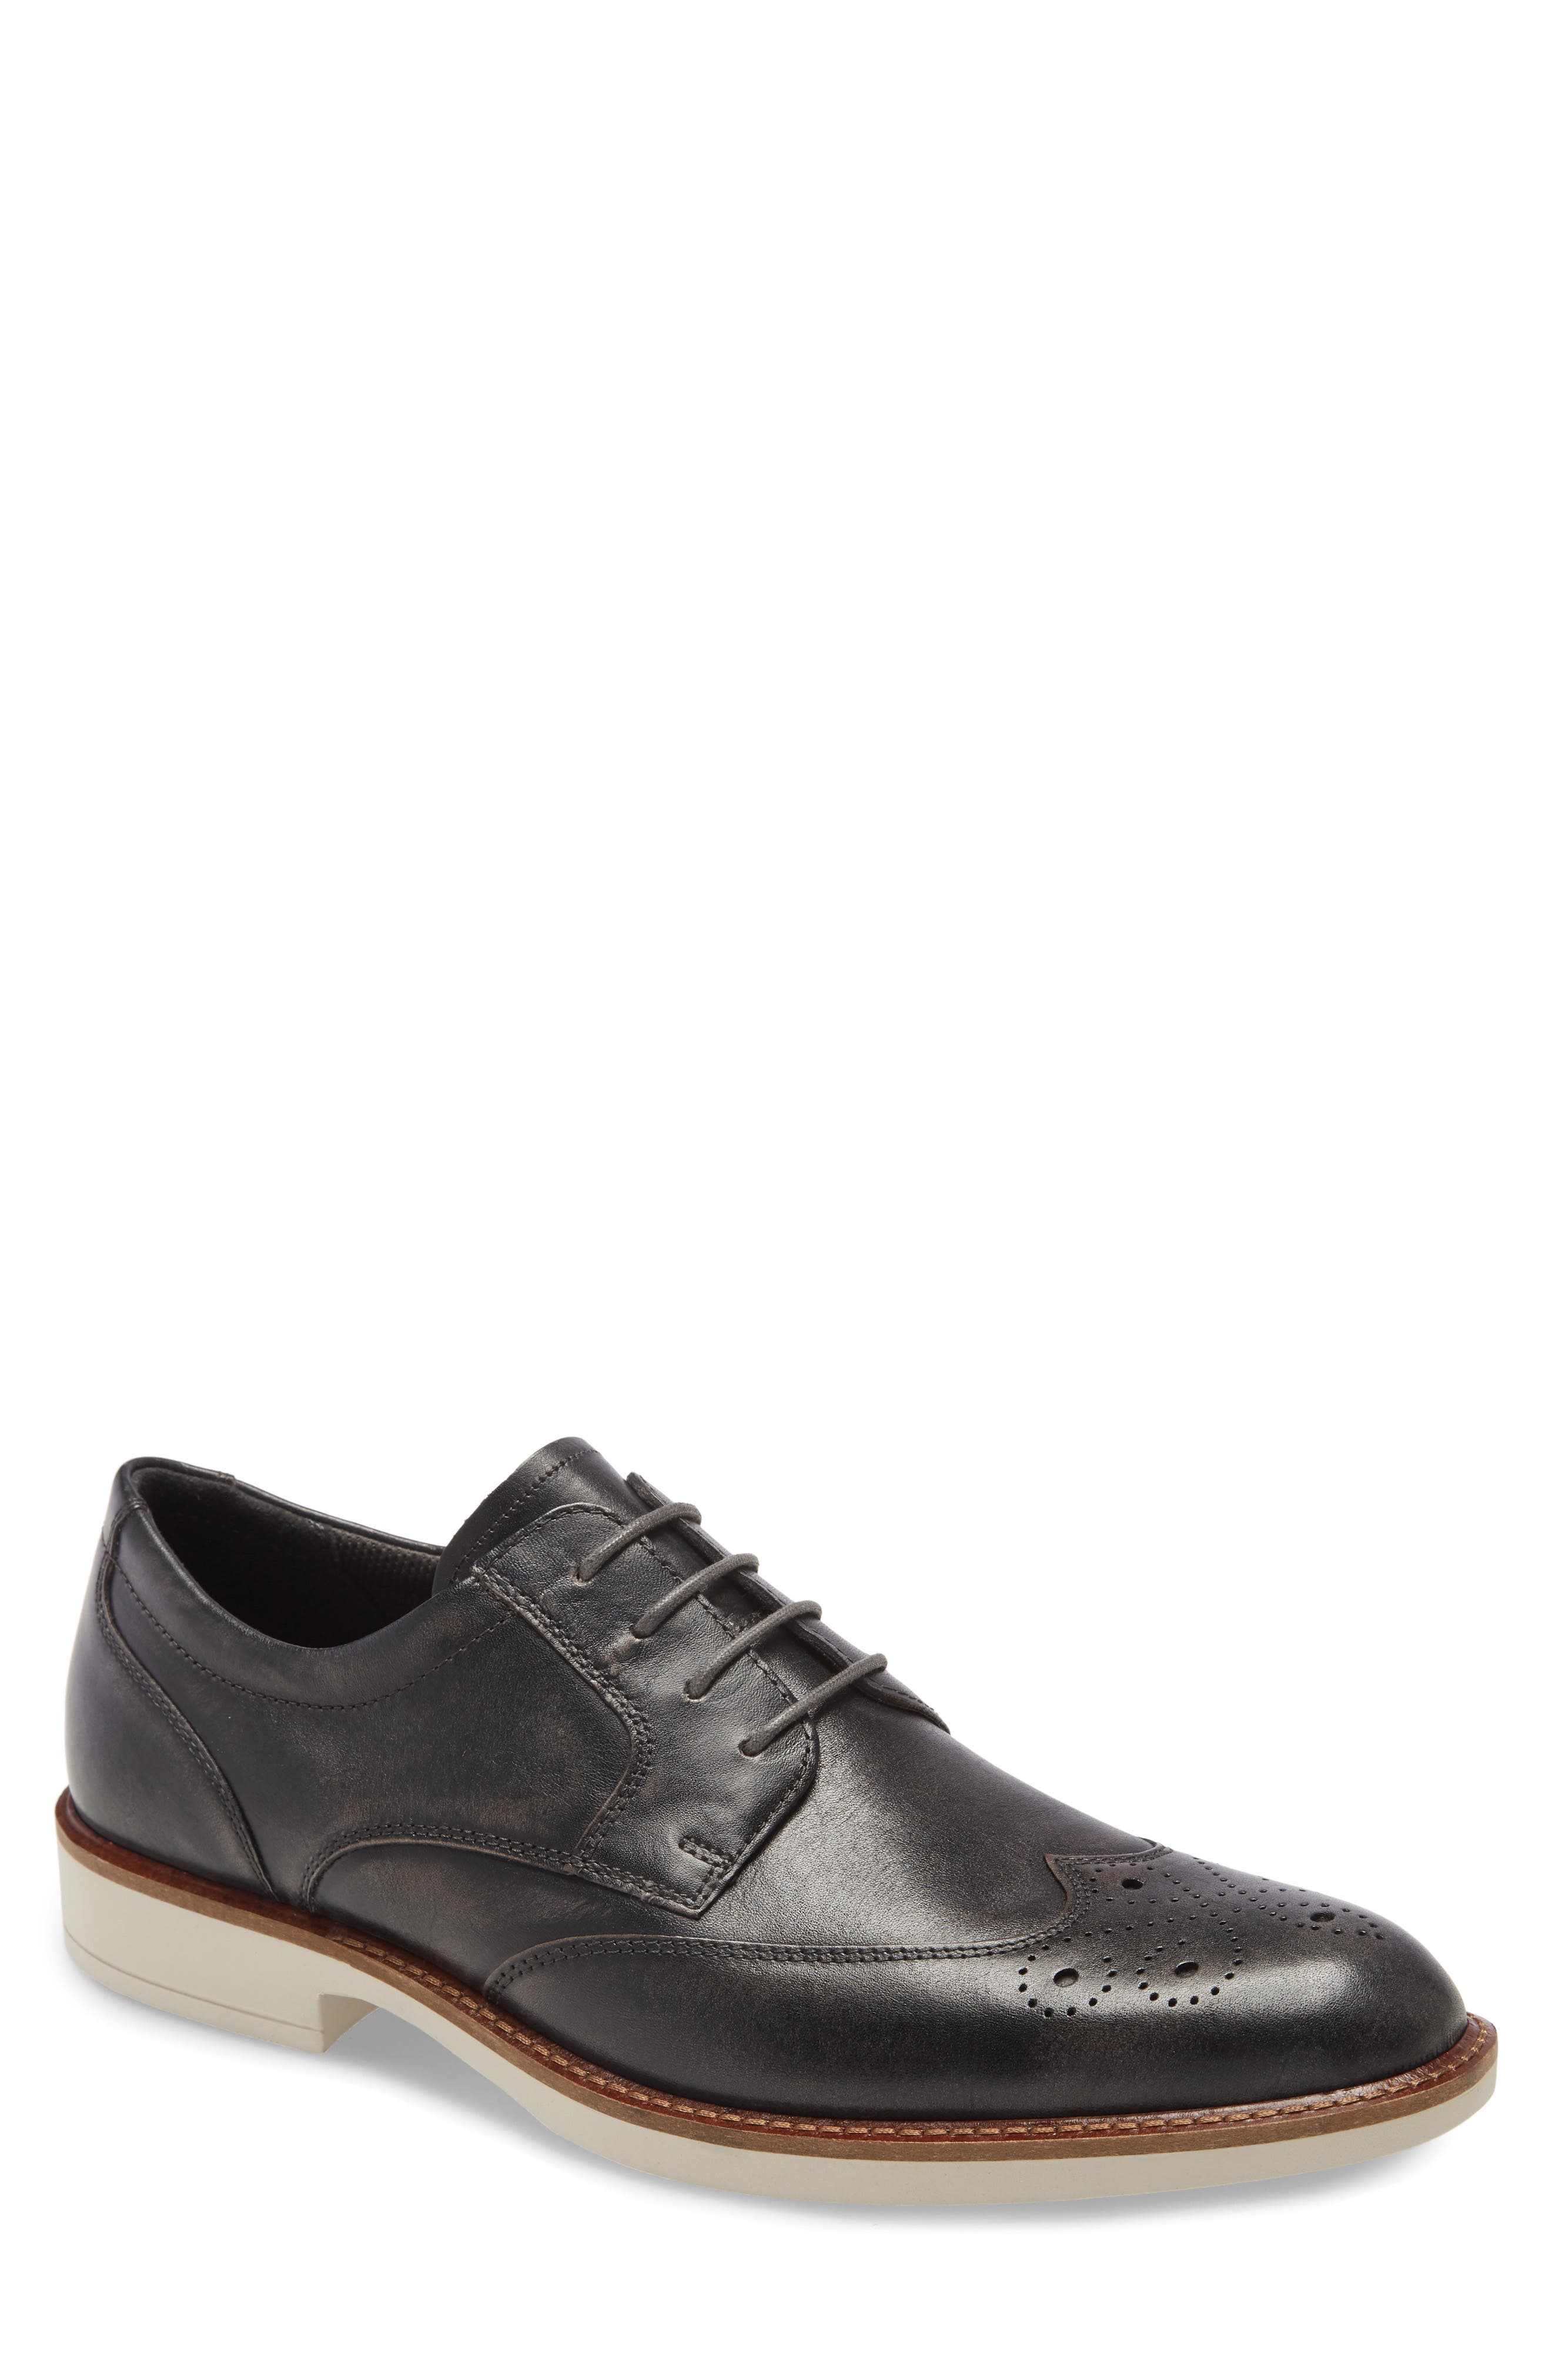 UPC 825840492514 product image for ECCO Biarritz Wingtip, Size 9-9.5Us in Magnet at Nordstrom | upcitemdb.com